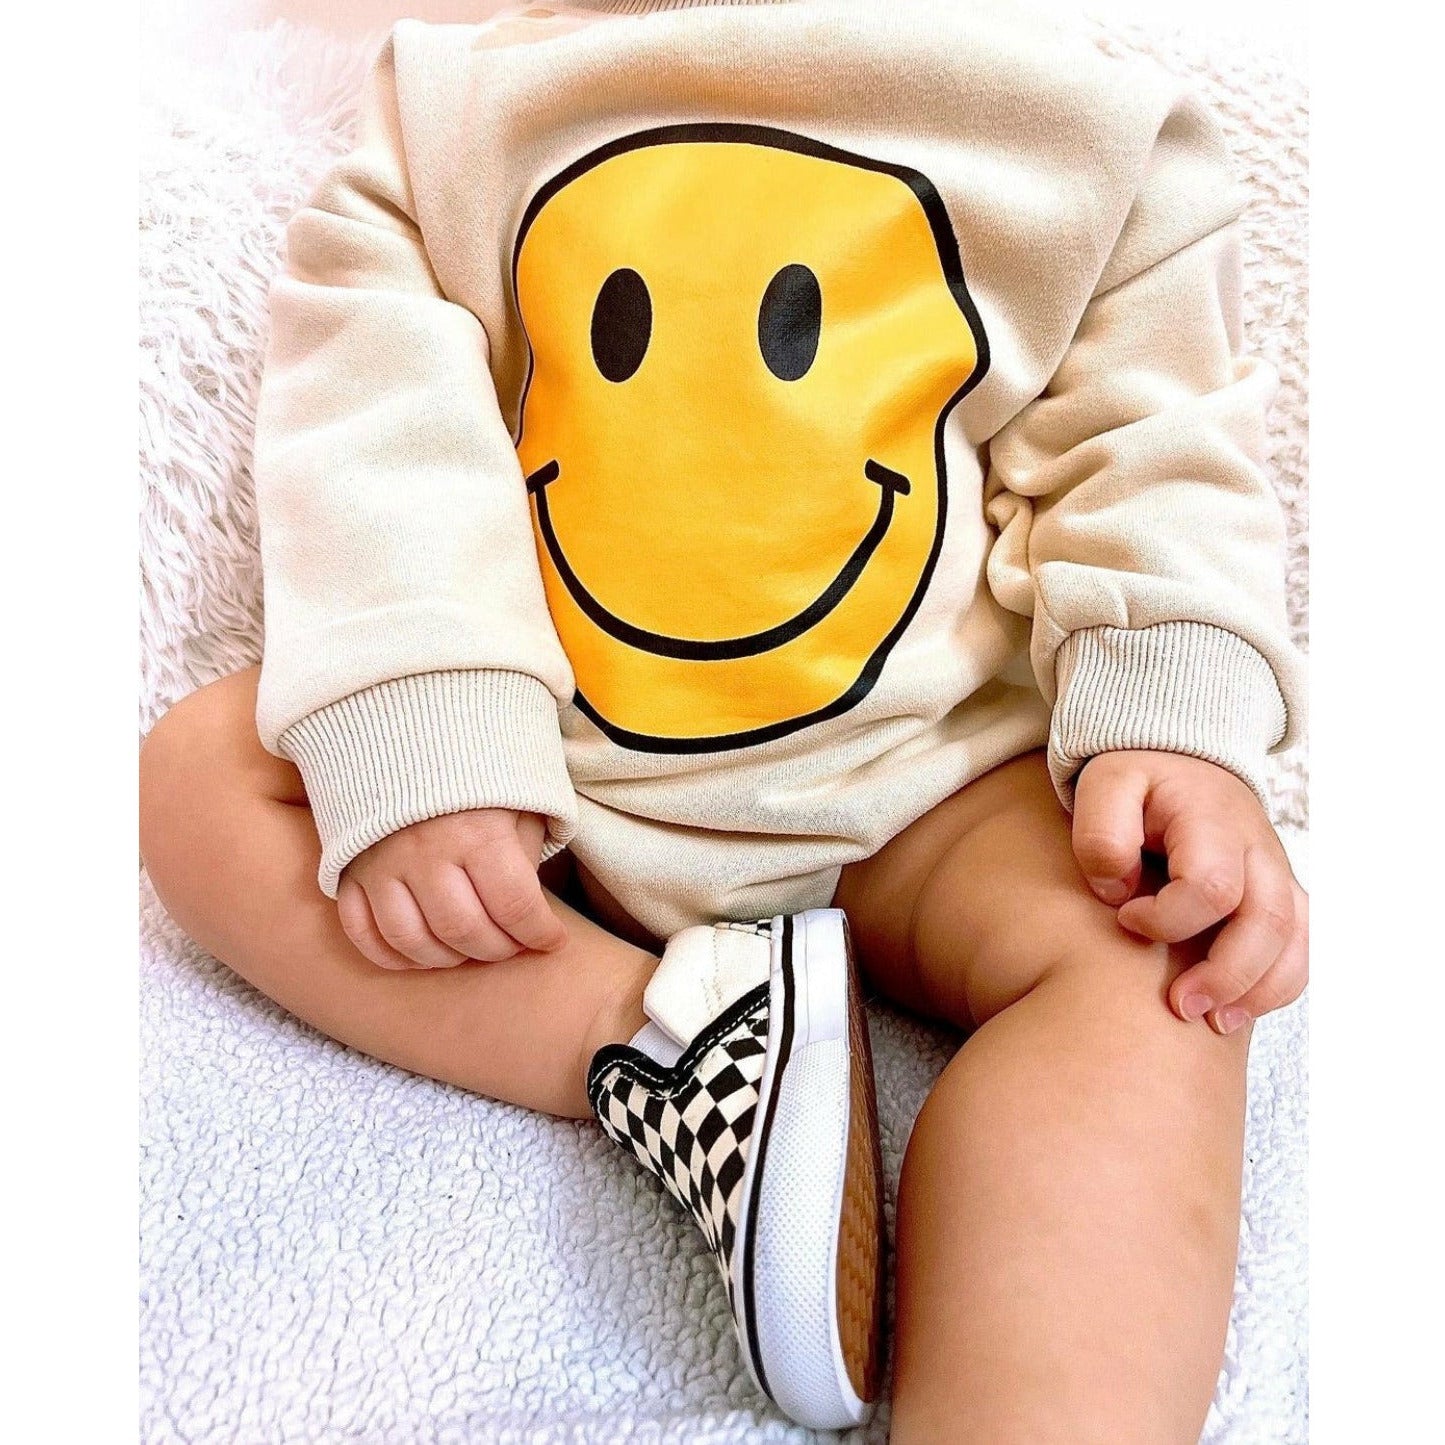 Babyface - Sweatshirt - Check only $44.95 and TAX FREE at Posh Baby